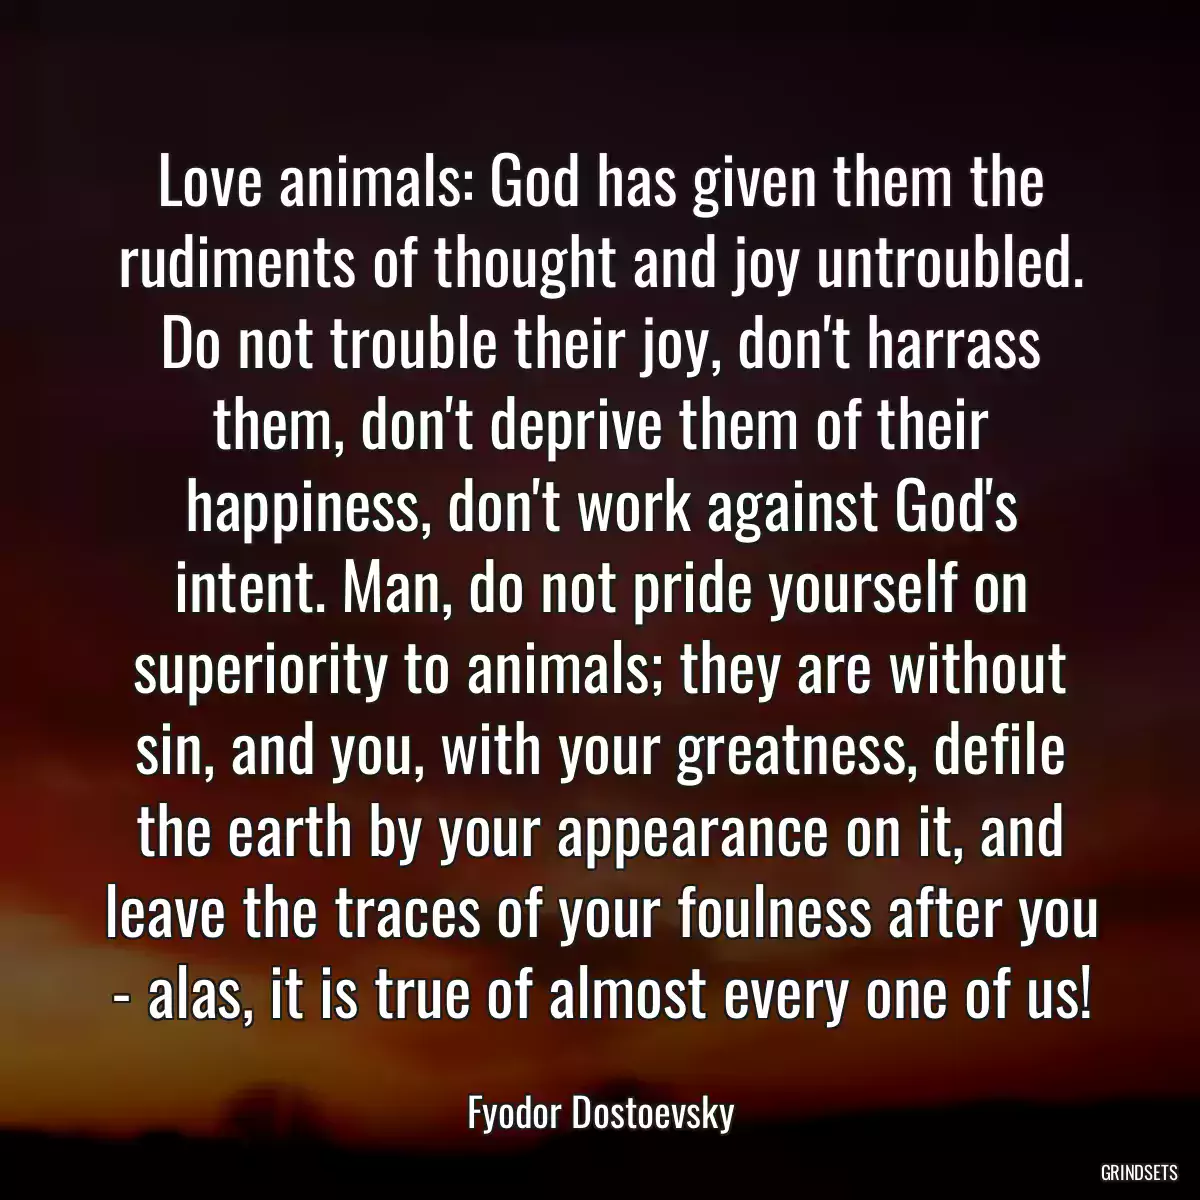 Love animals: God has given them the rudiments of thought and joy untroubled. Do not trouble their joy, don\'t harrass them, don\'t deprive them of their happiness, don\'t work against God\'s intent. Man, do not pride yourself on superiority to animals; they are without sin, and you, with your greatness, defile the earth by your appearance on it, and leave the traces of your foulness after you - alas, it is true of almost every one of us!